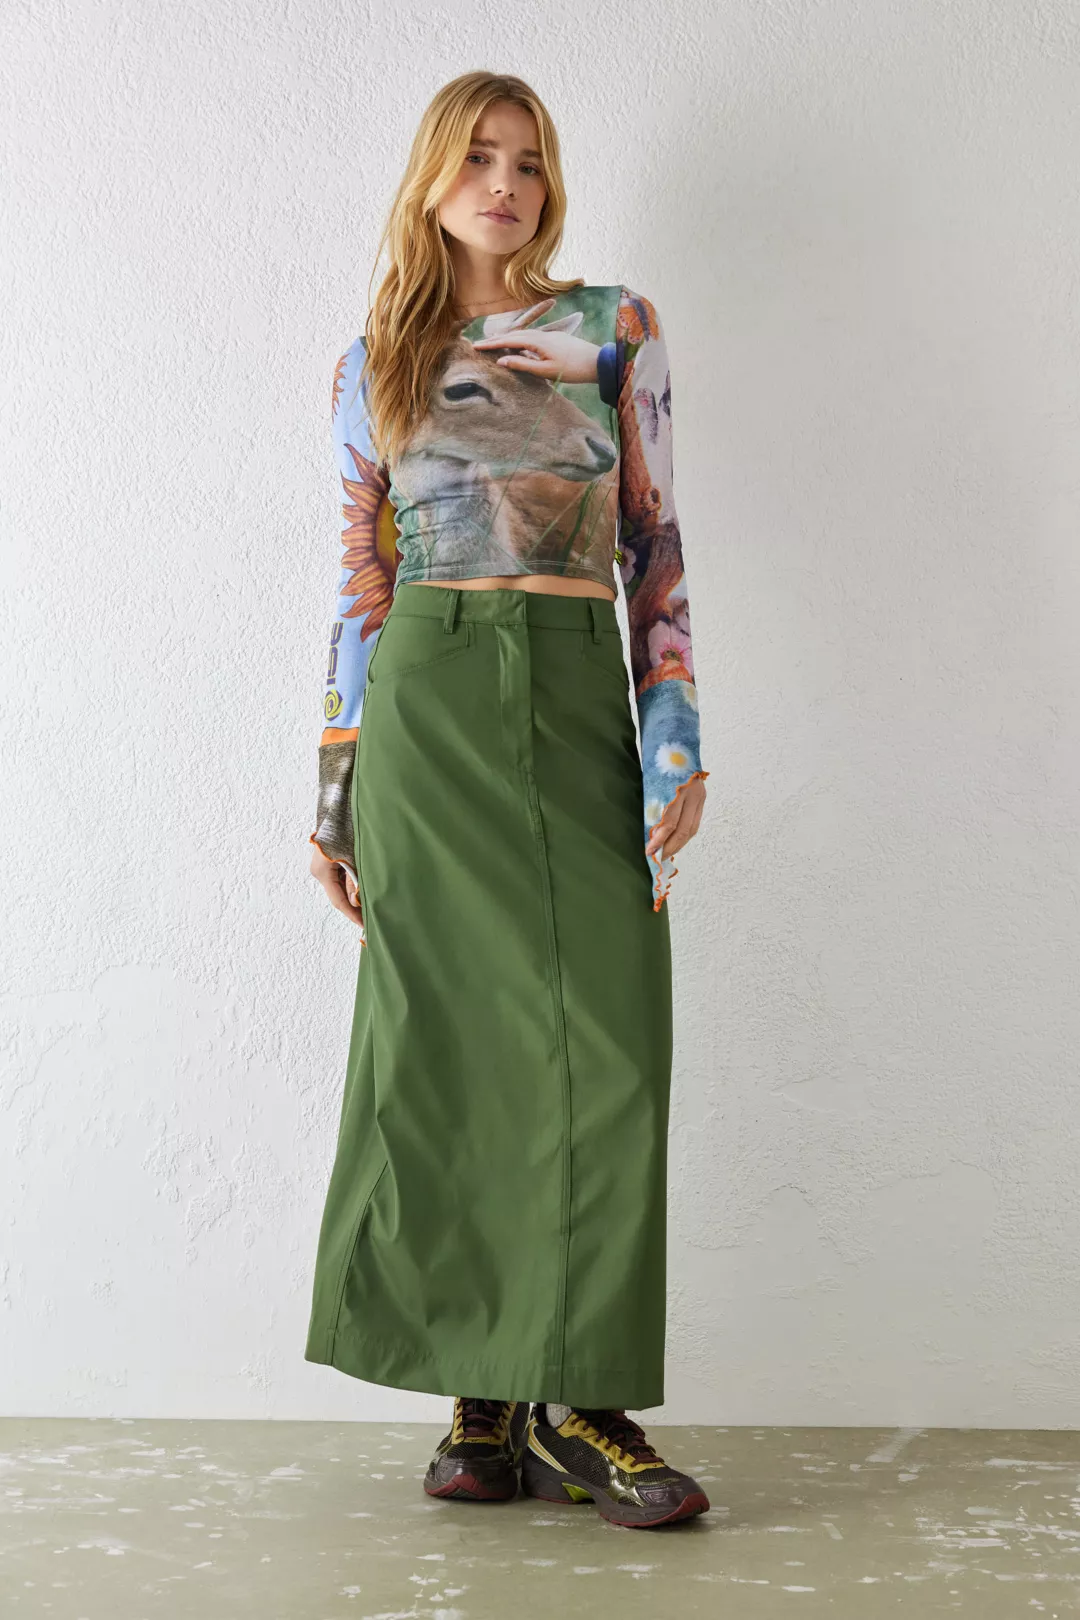 Urban Outfitters khaki green Utility-style cargo maxi skirt from Basic Pleasure Mode. Crafted from a nylon-inspired fabrication Ft. a midrise waist with a button fastening, belt loops, side pockets and a long maxi hem. Finished with two pockets to reverse and a split for added flexibility. Complete with logo detailing to reverse pockets.

